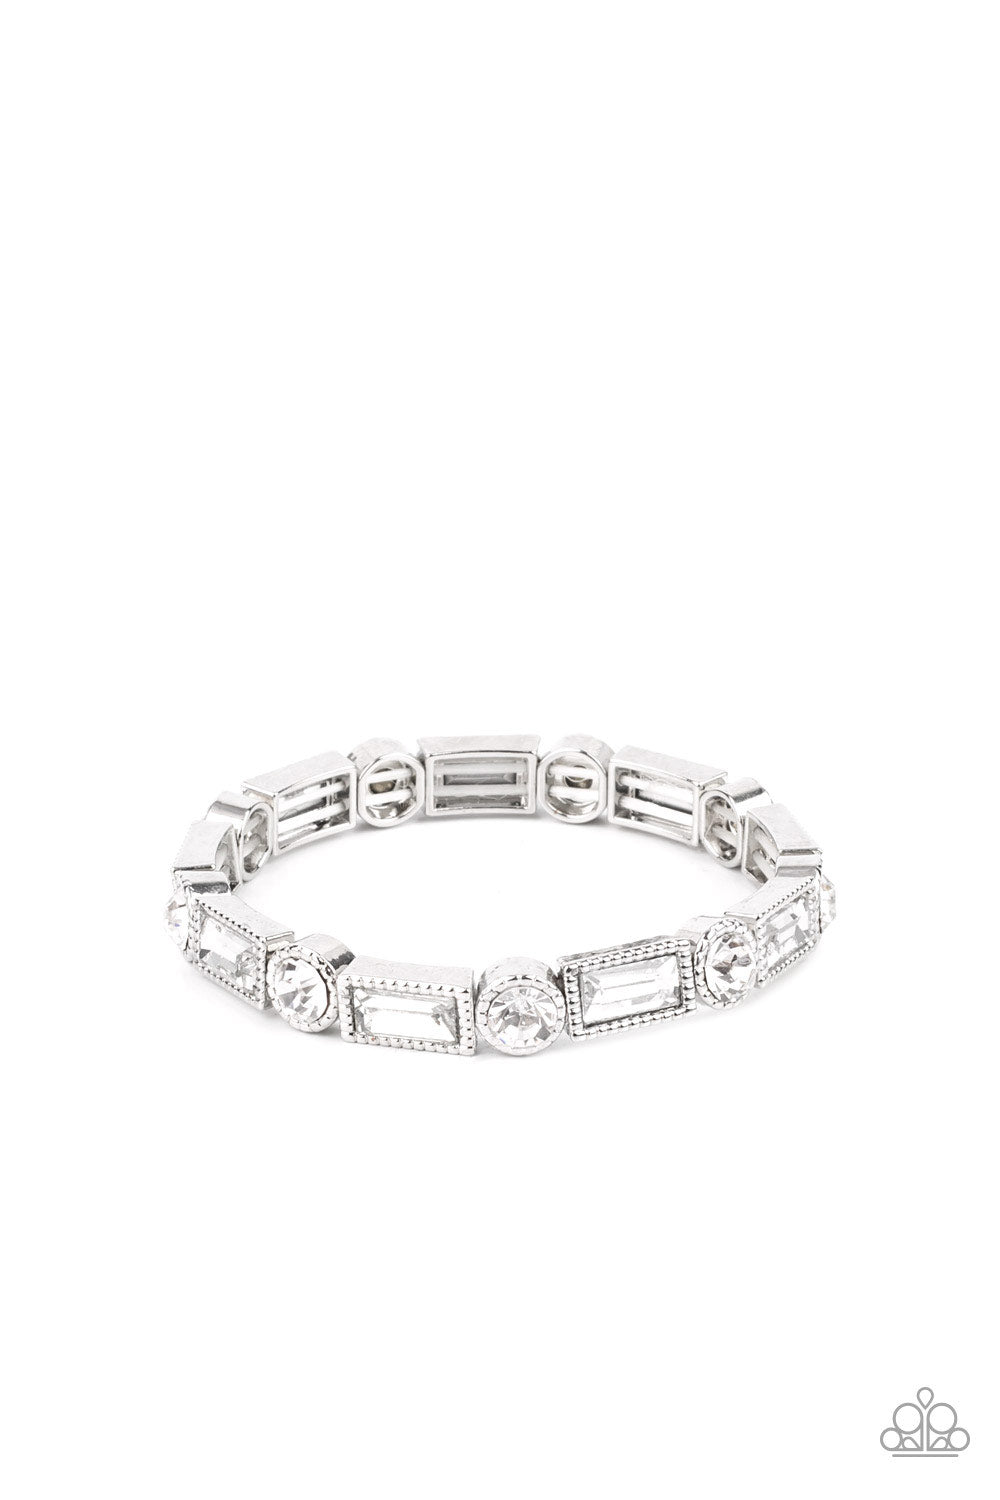 Classic Couture White Bracelet - Paparazzi Accessories  Classic round and baguette-cut rhinestones set in shiny dotted silver frames alternate around the wrist on stretchy bands for a shimmering finish.  Sold as one individual bracelet.